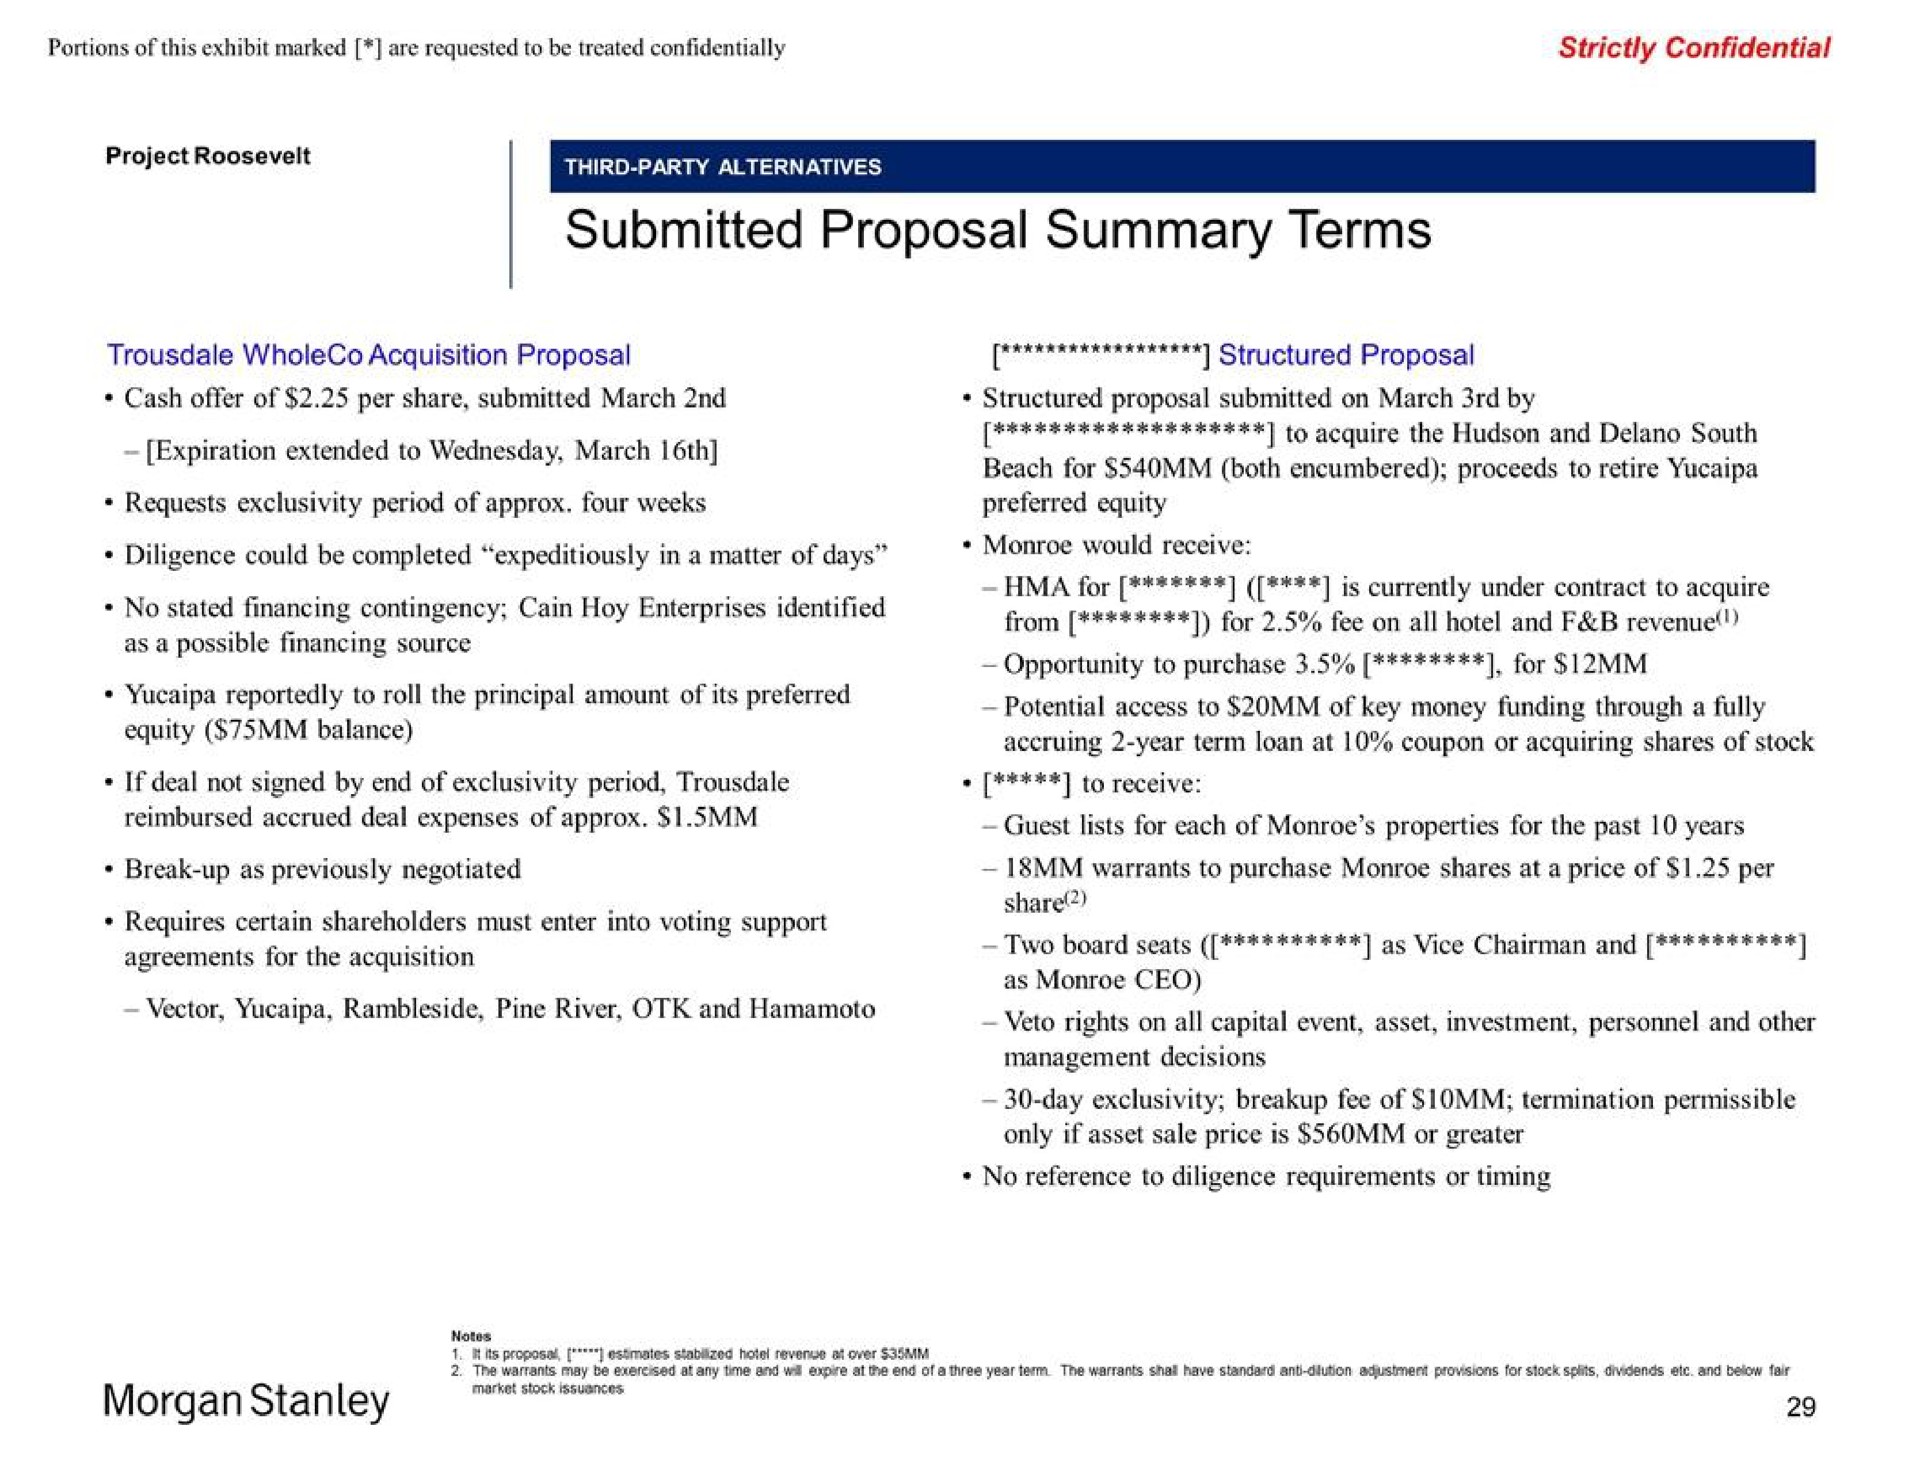 submitted proposal summary terms morgan | Morgan Stanley